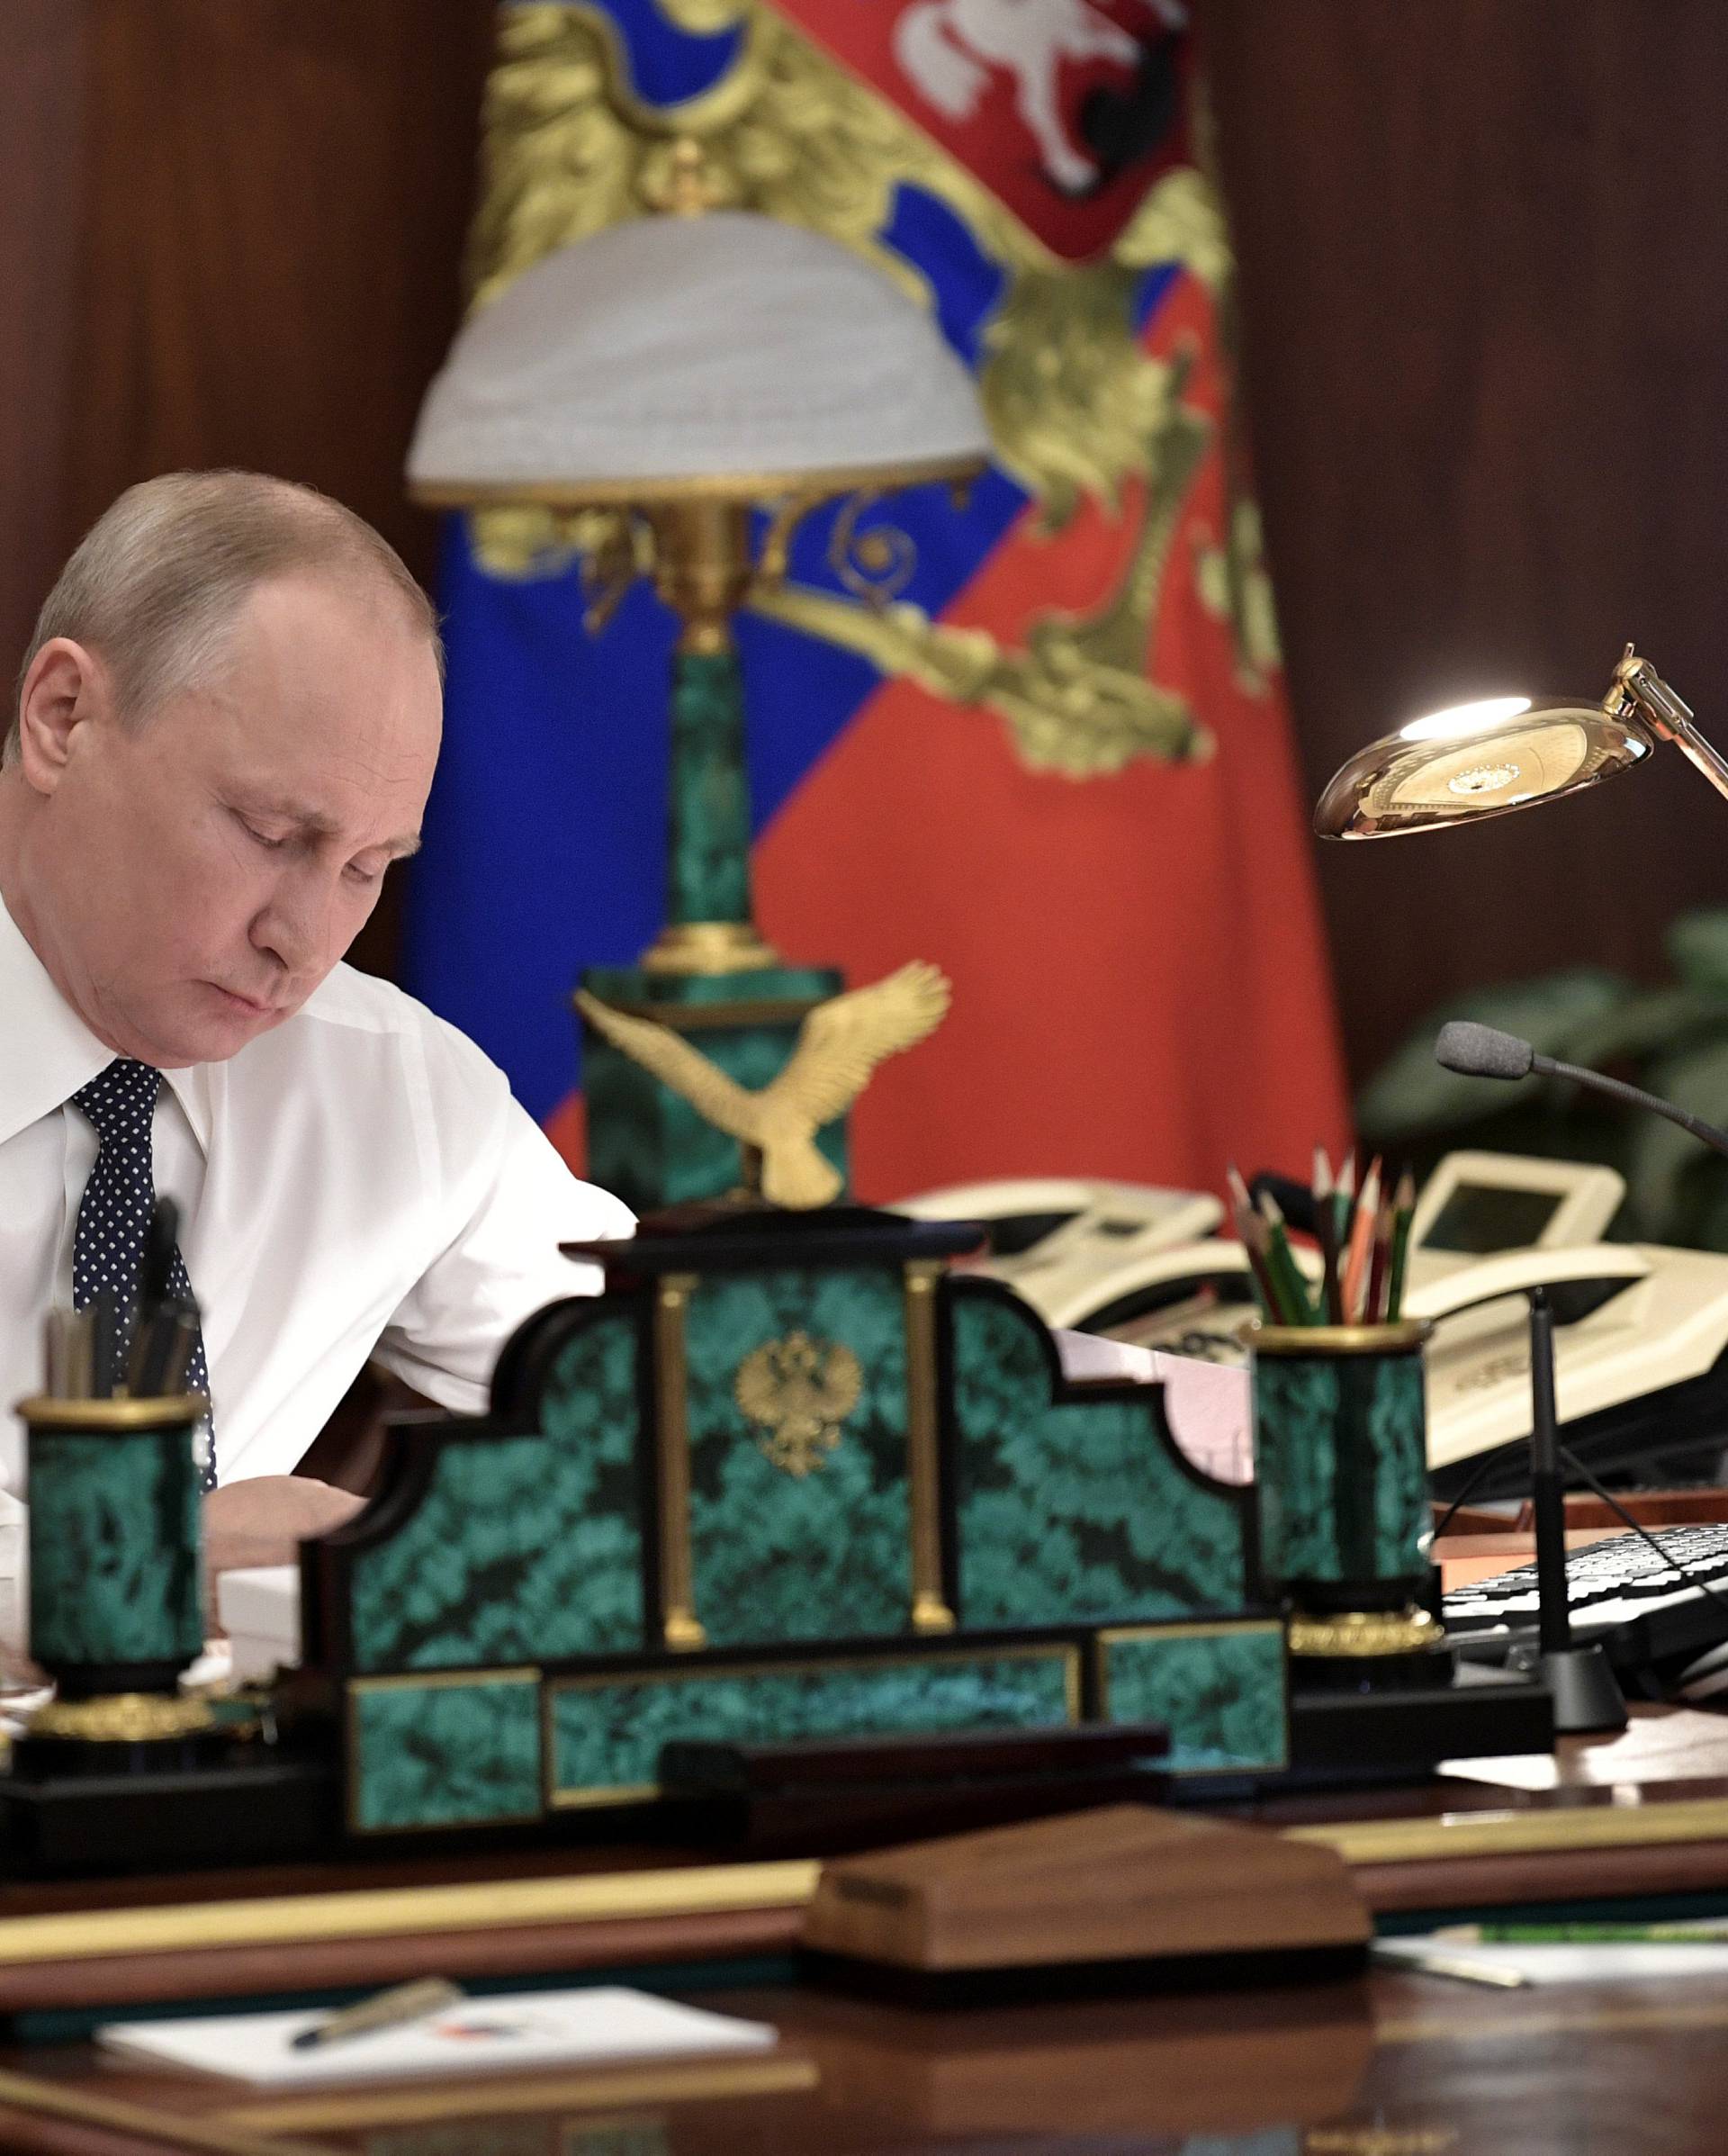 Russian President Putin works in his cabinet before an inauguration ceremony at the Kremlin in Moscow